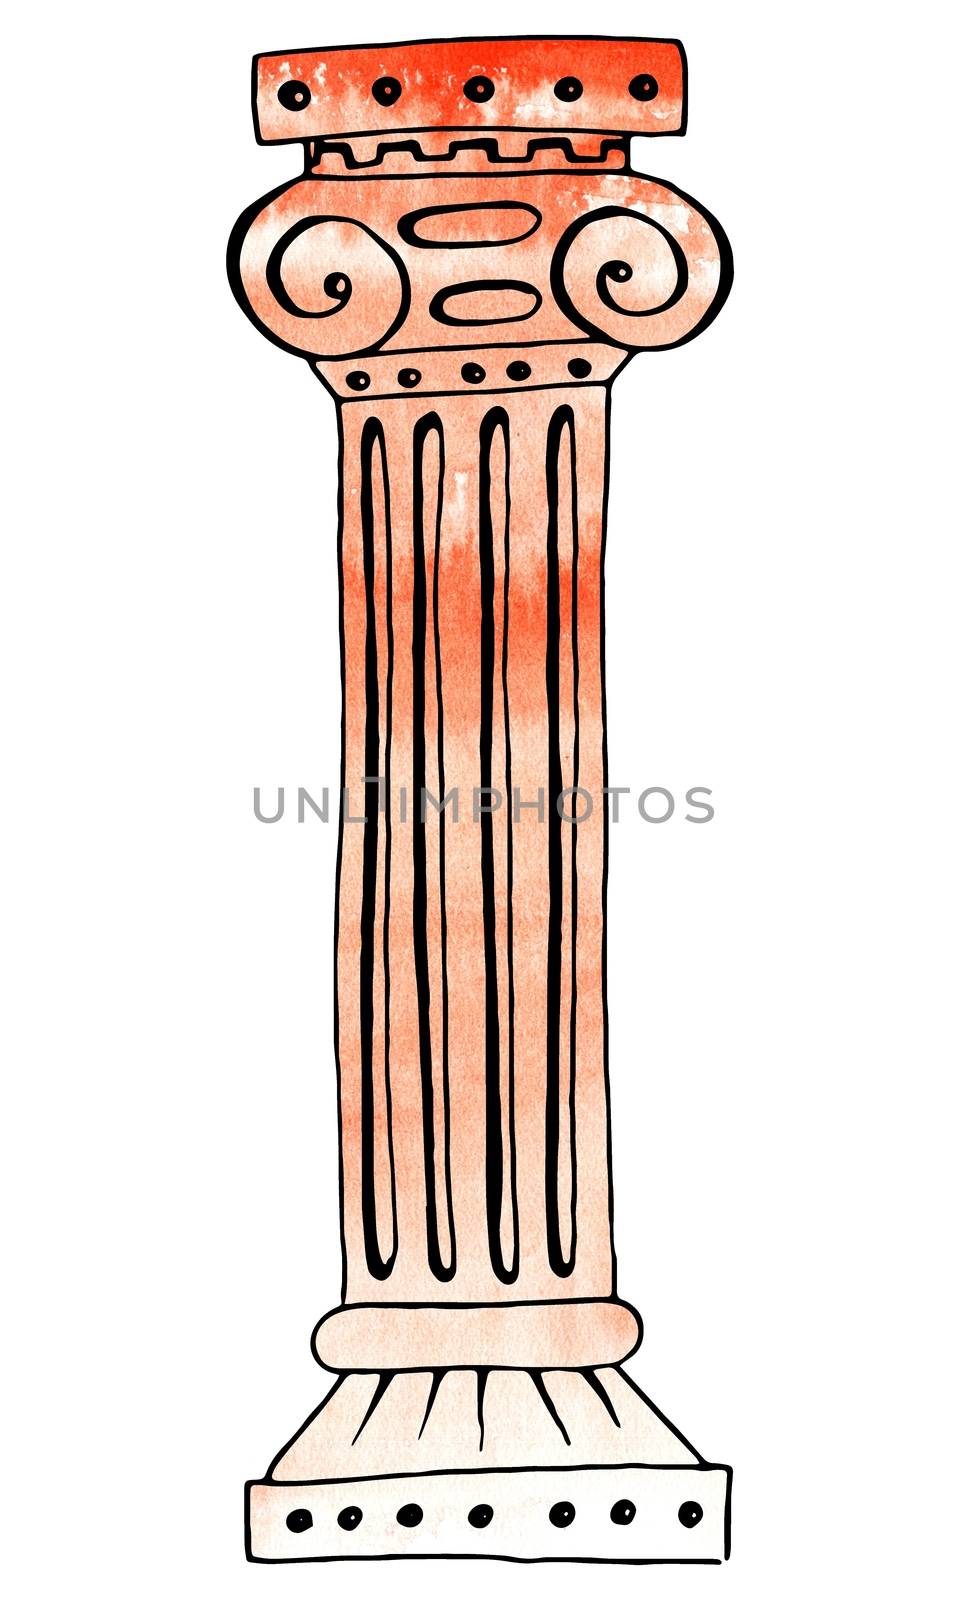 Ancient Roman column. Hand drawing and computer processing. For design - tourism, Rome, attractions, architecture, ancient world